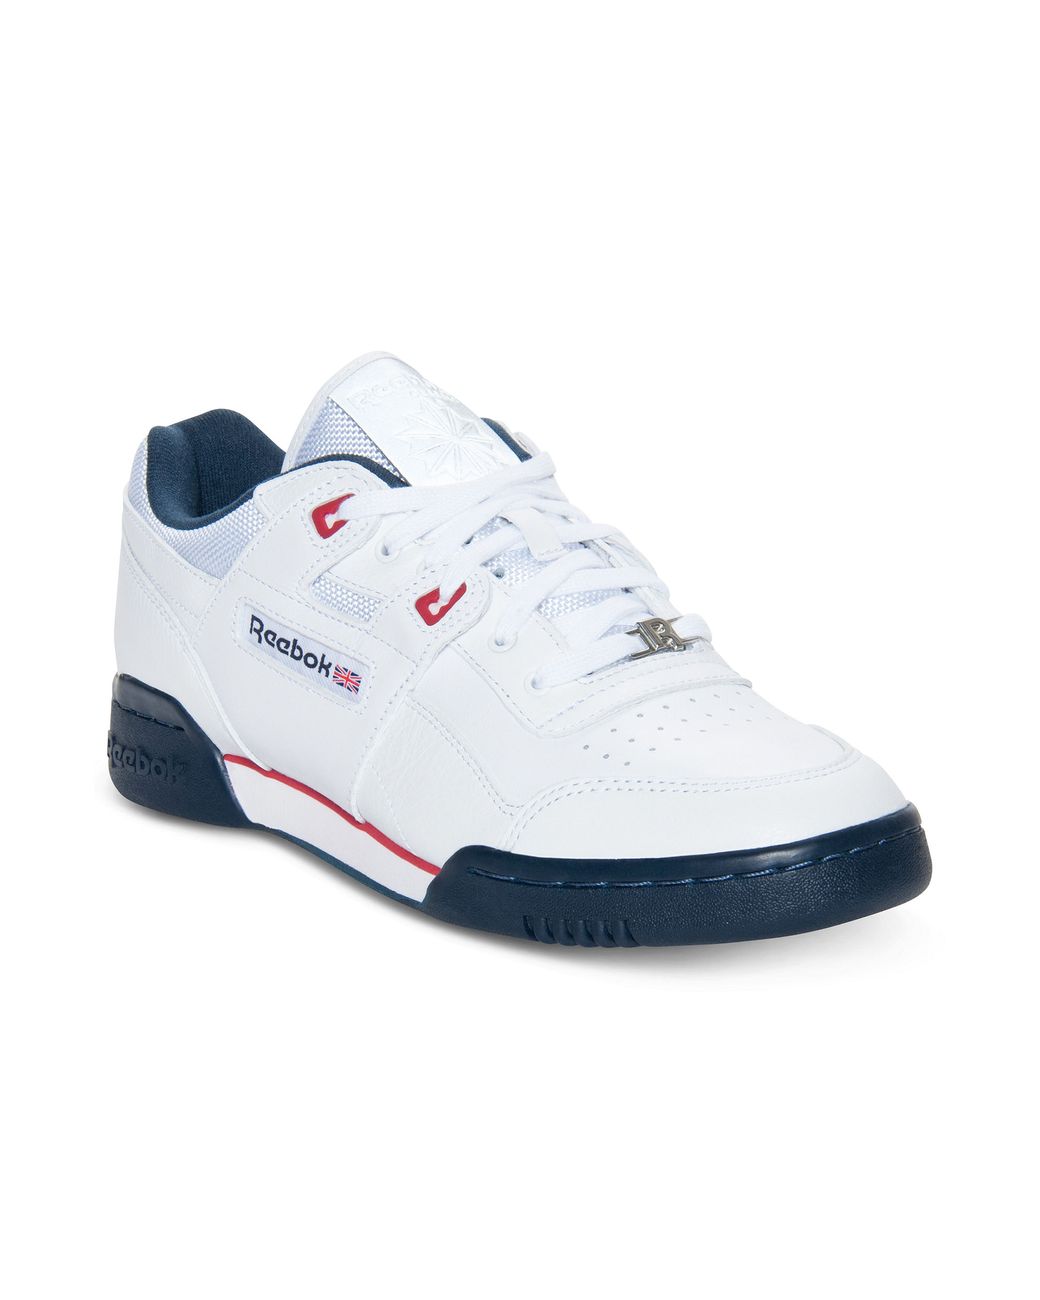 Reebok Workout Plus Casual Sneakers in White/Navy/Red (White) for Men ...